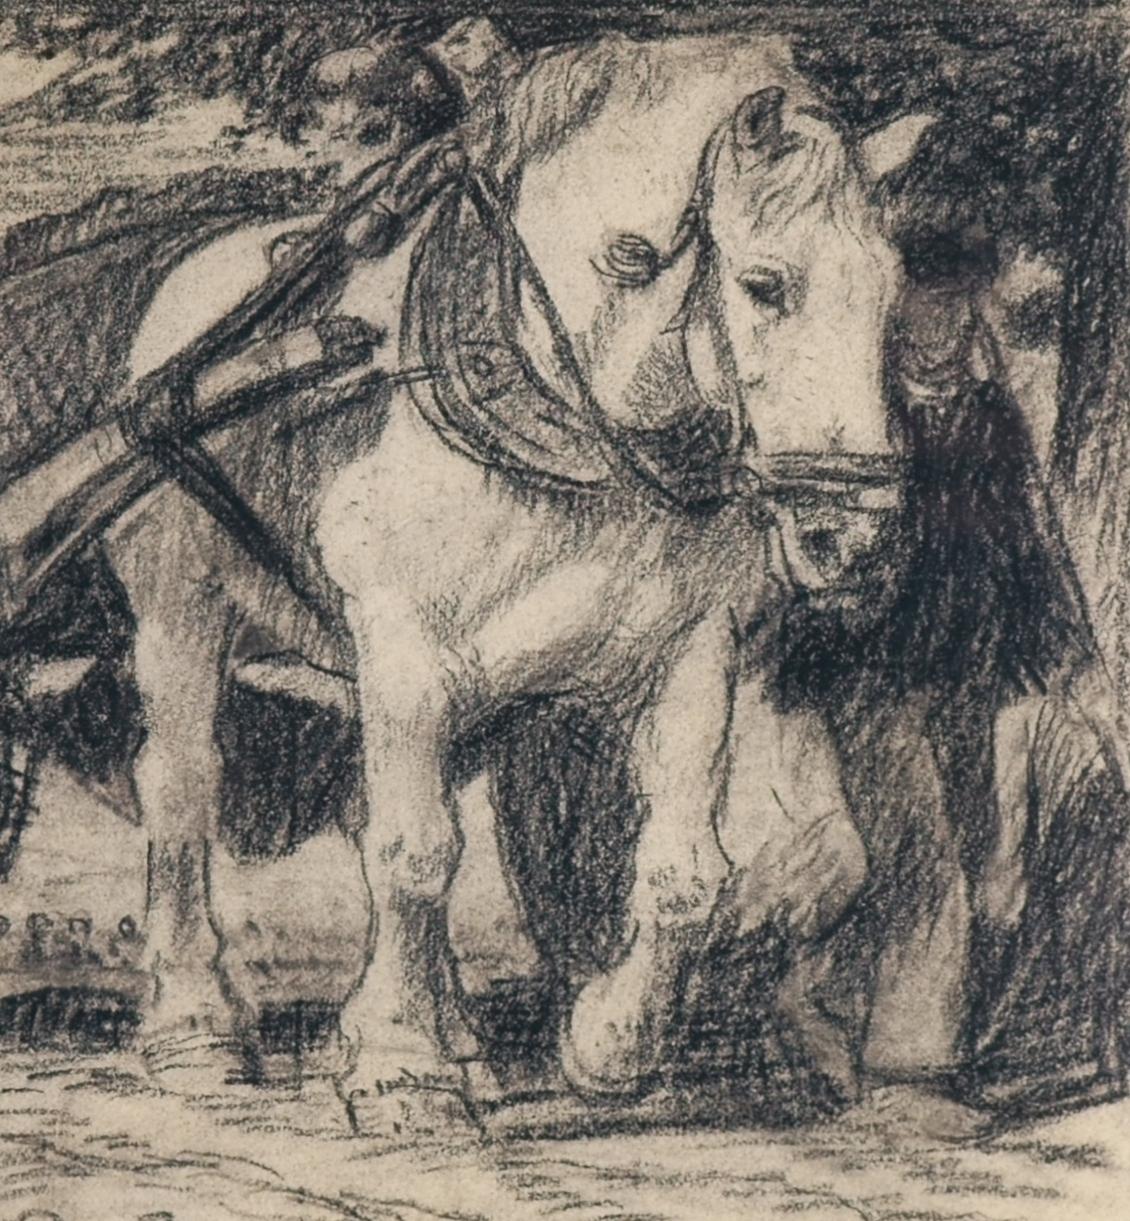 Draft Horse with Cart / - The Burden of Life - - Art by Julius Paul Junghanns